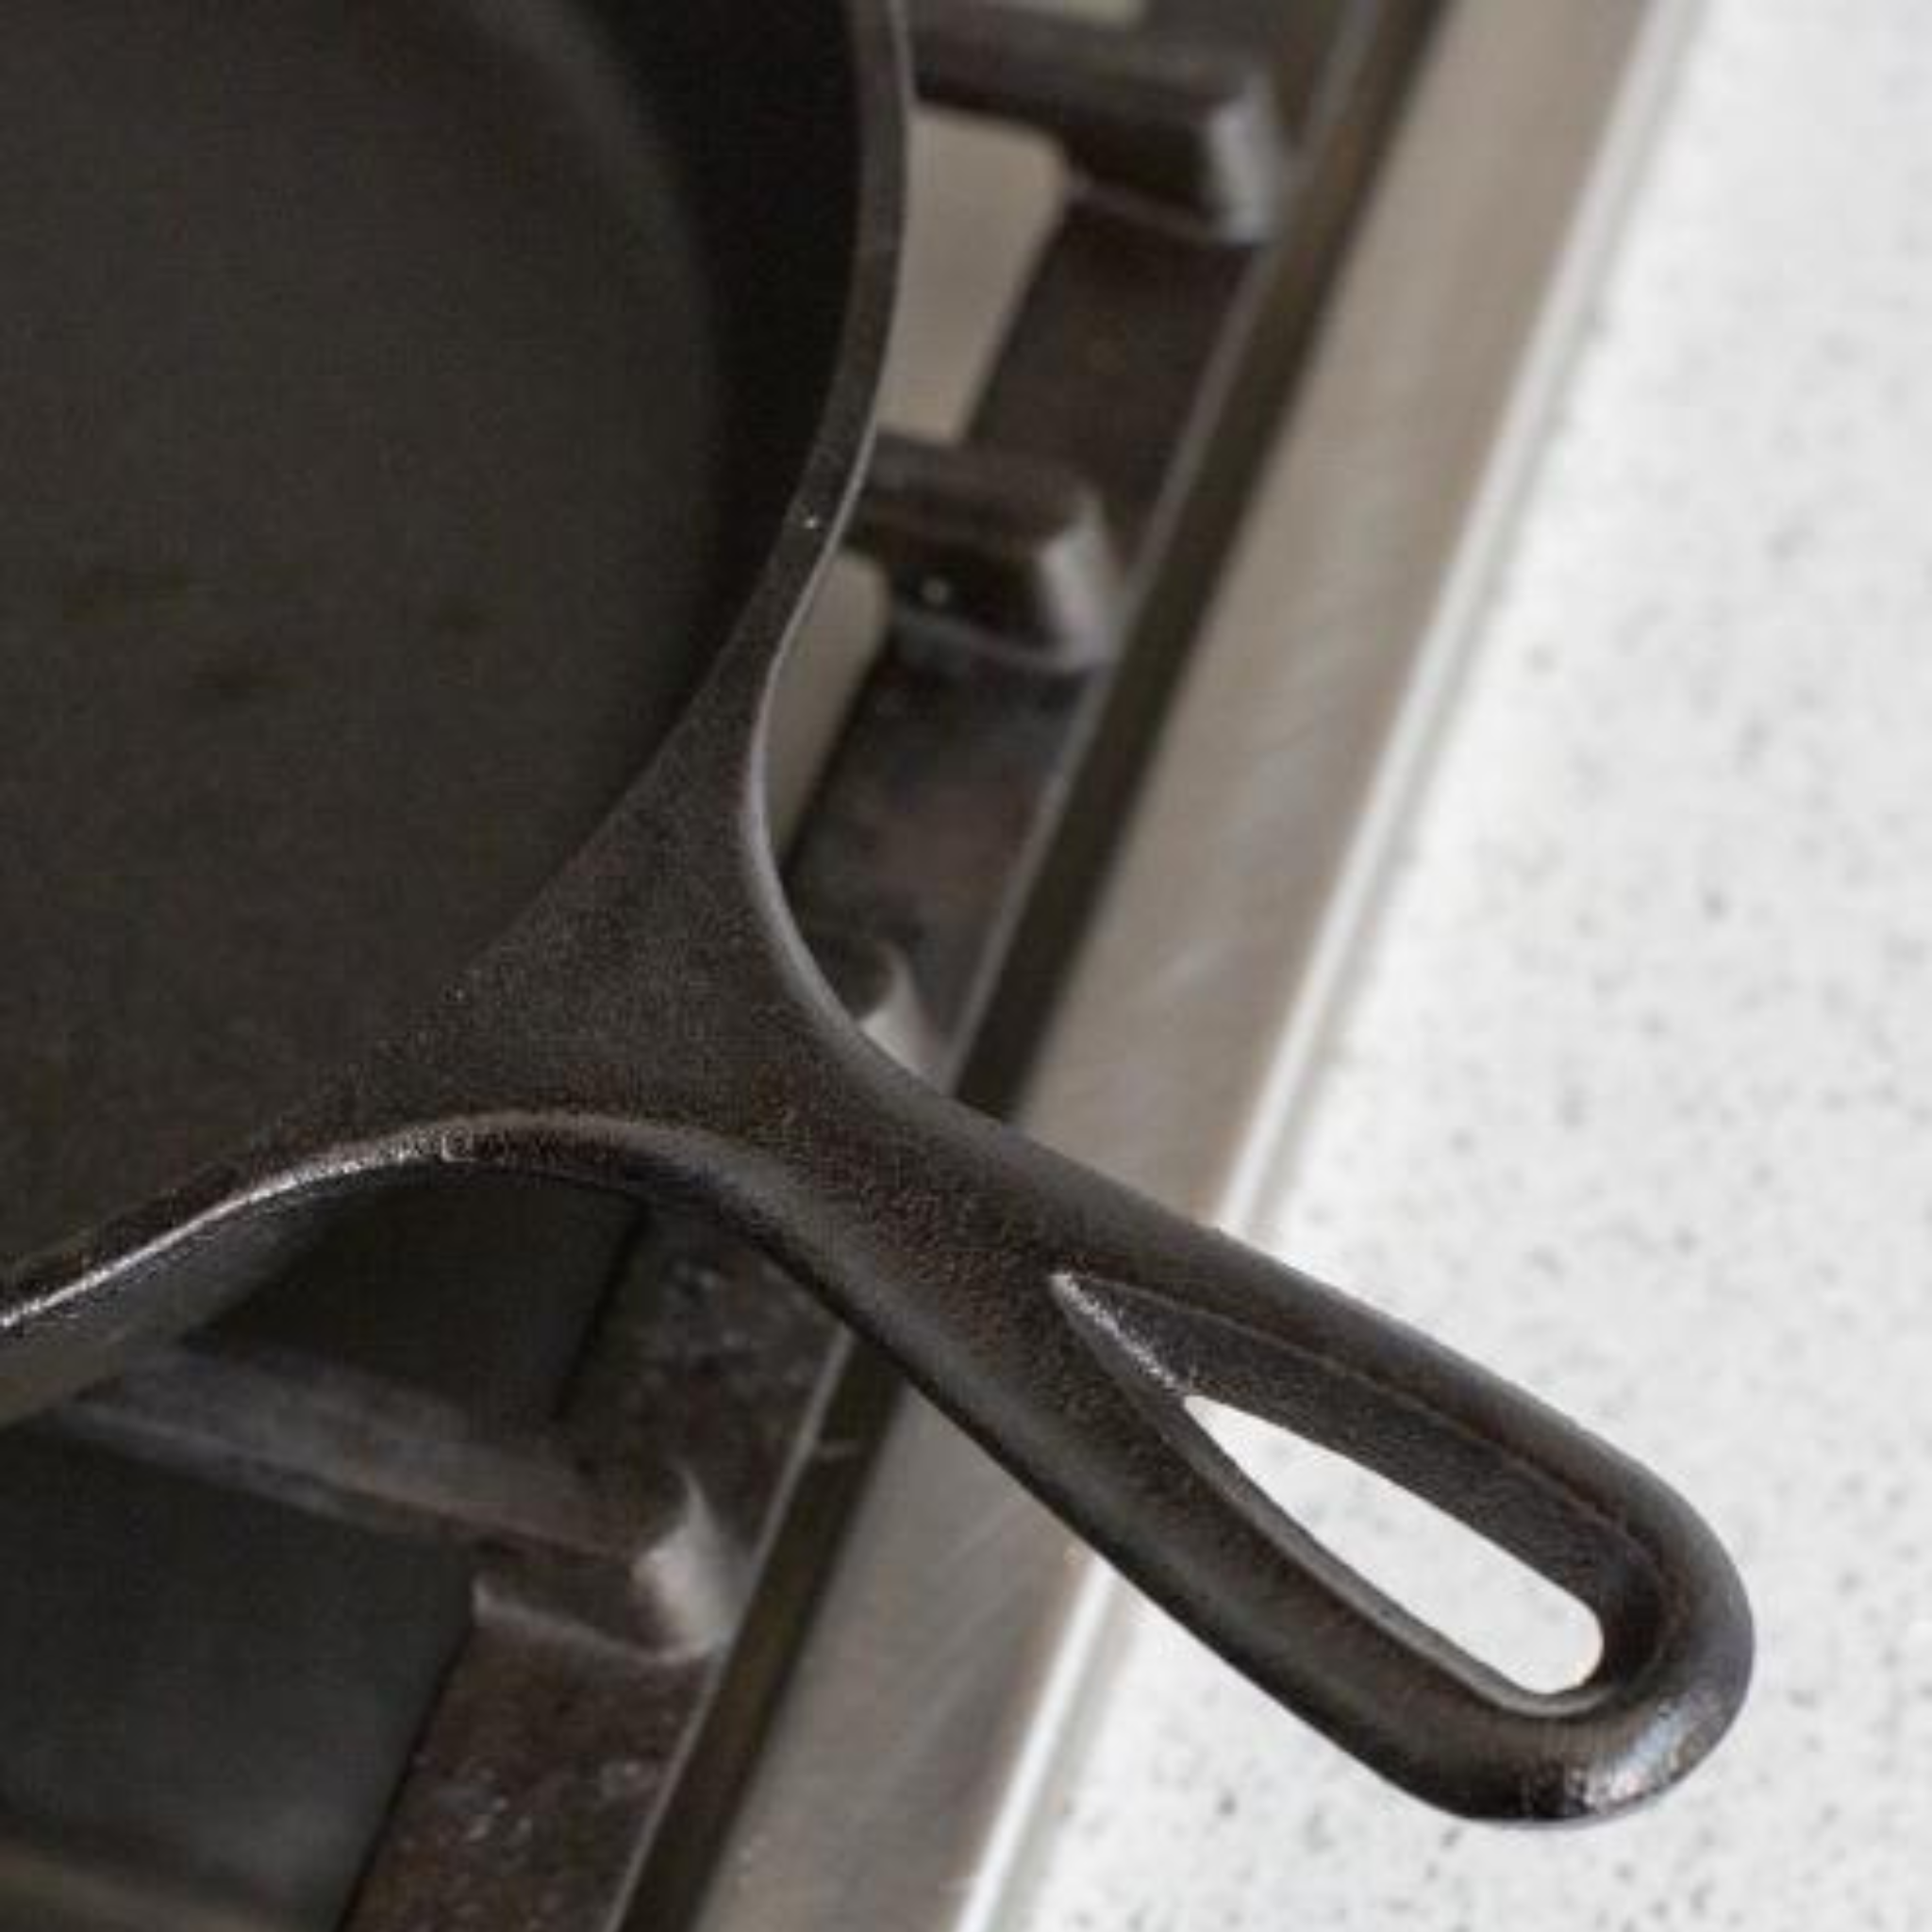 Seasoning Lodge Cast Iron: A Step-by-step Guide